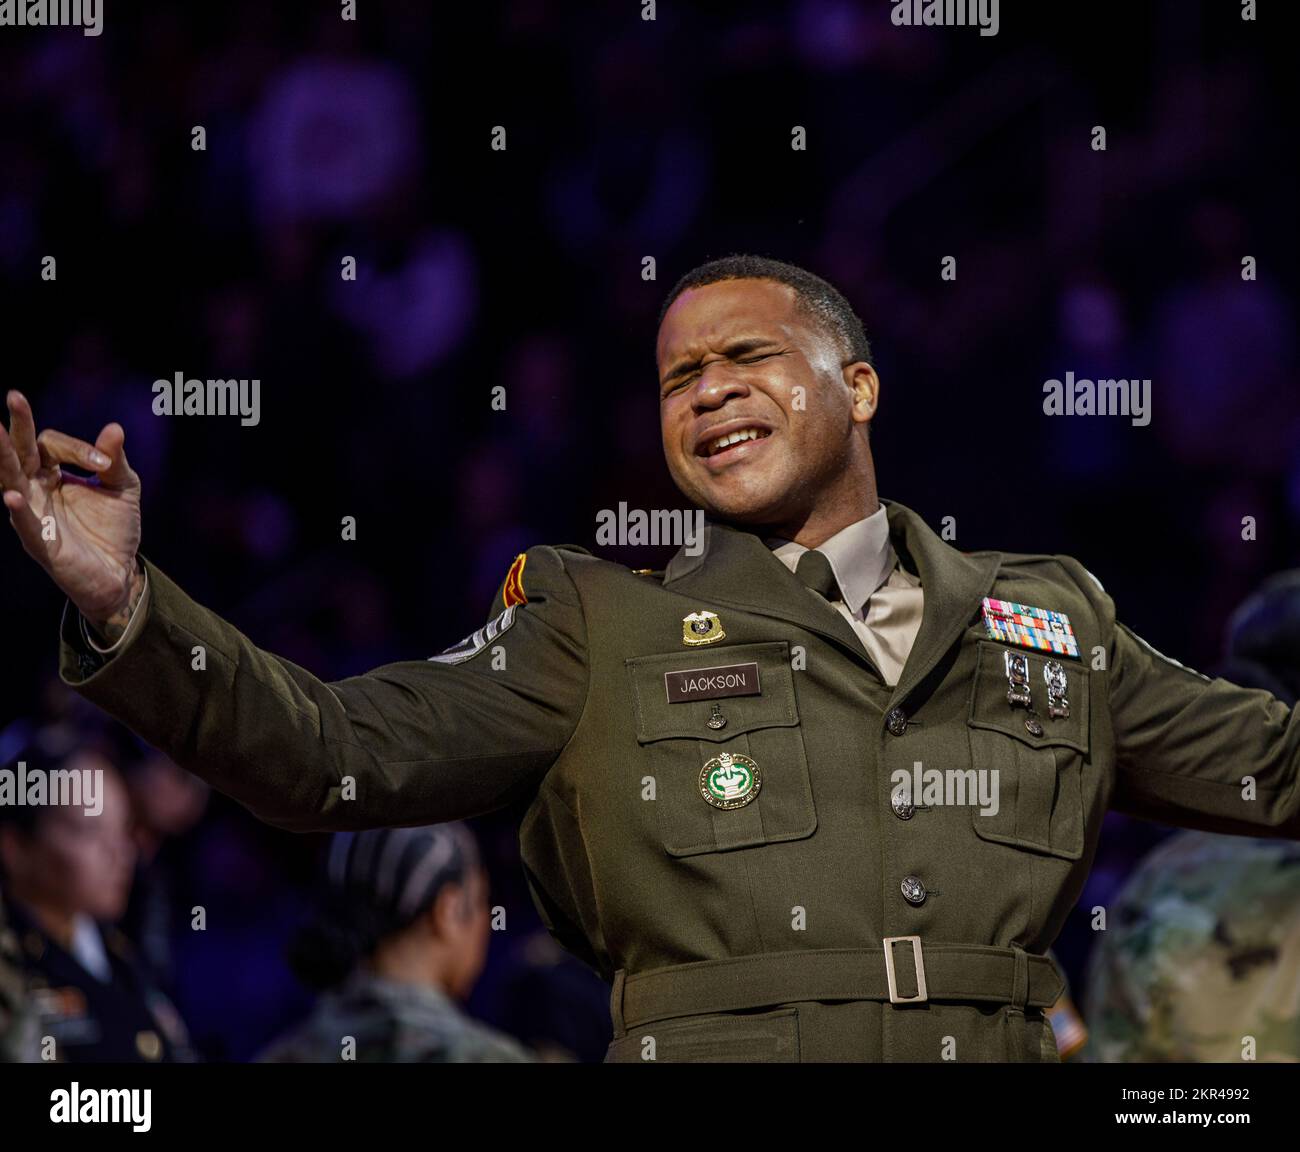 DETROIT, Mich. - 1st Sgt. Christopher Jackson narrates the National Anthem in sign language at the Detroit Pistons Military Appreciation (Hoops for Troops) game Nov. 7, 2022. (Army Reserve photo by Pfc. Joseph Honce, 220th Public Affairs Detachment).     The Detroit Pistons honor the service of our veterans at the Military Appreciation (Hoops for Troops) game in honor of Veterans Day. Veterans Day is a way to say thank you to all those who have served with the highest appreciation. Those who have risked their lives making sacrifices for their country and families. The expression of gratitude a Stock Photo